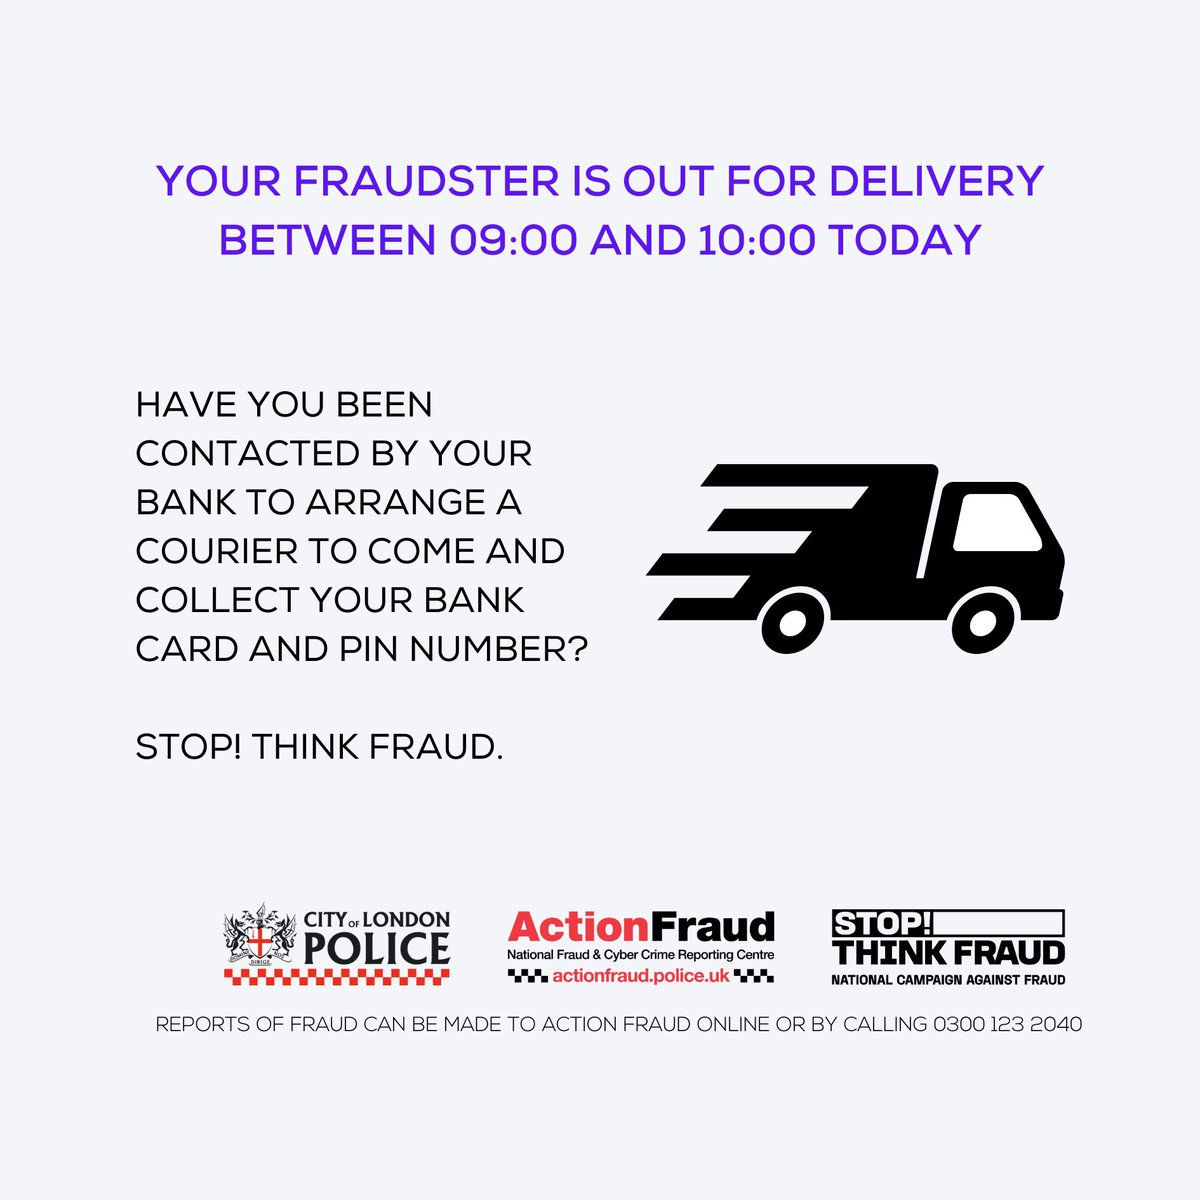 Have you been contacted by someone claiming to be from your bank? It could be courier fraud. Never hand over your card and PIN number, especially if someone offers to collect it. If the crime is ongoing, dial 999. You can also make a fraud report at orlo.uk/0MPZD